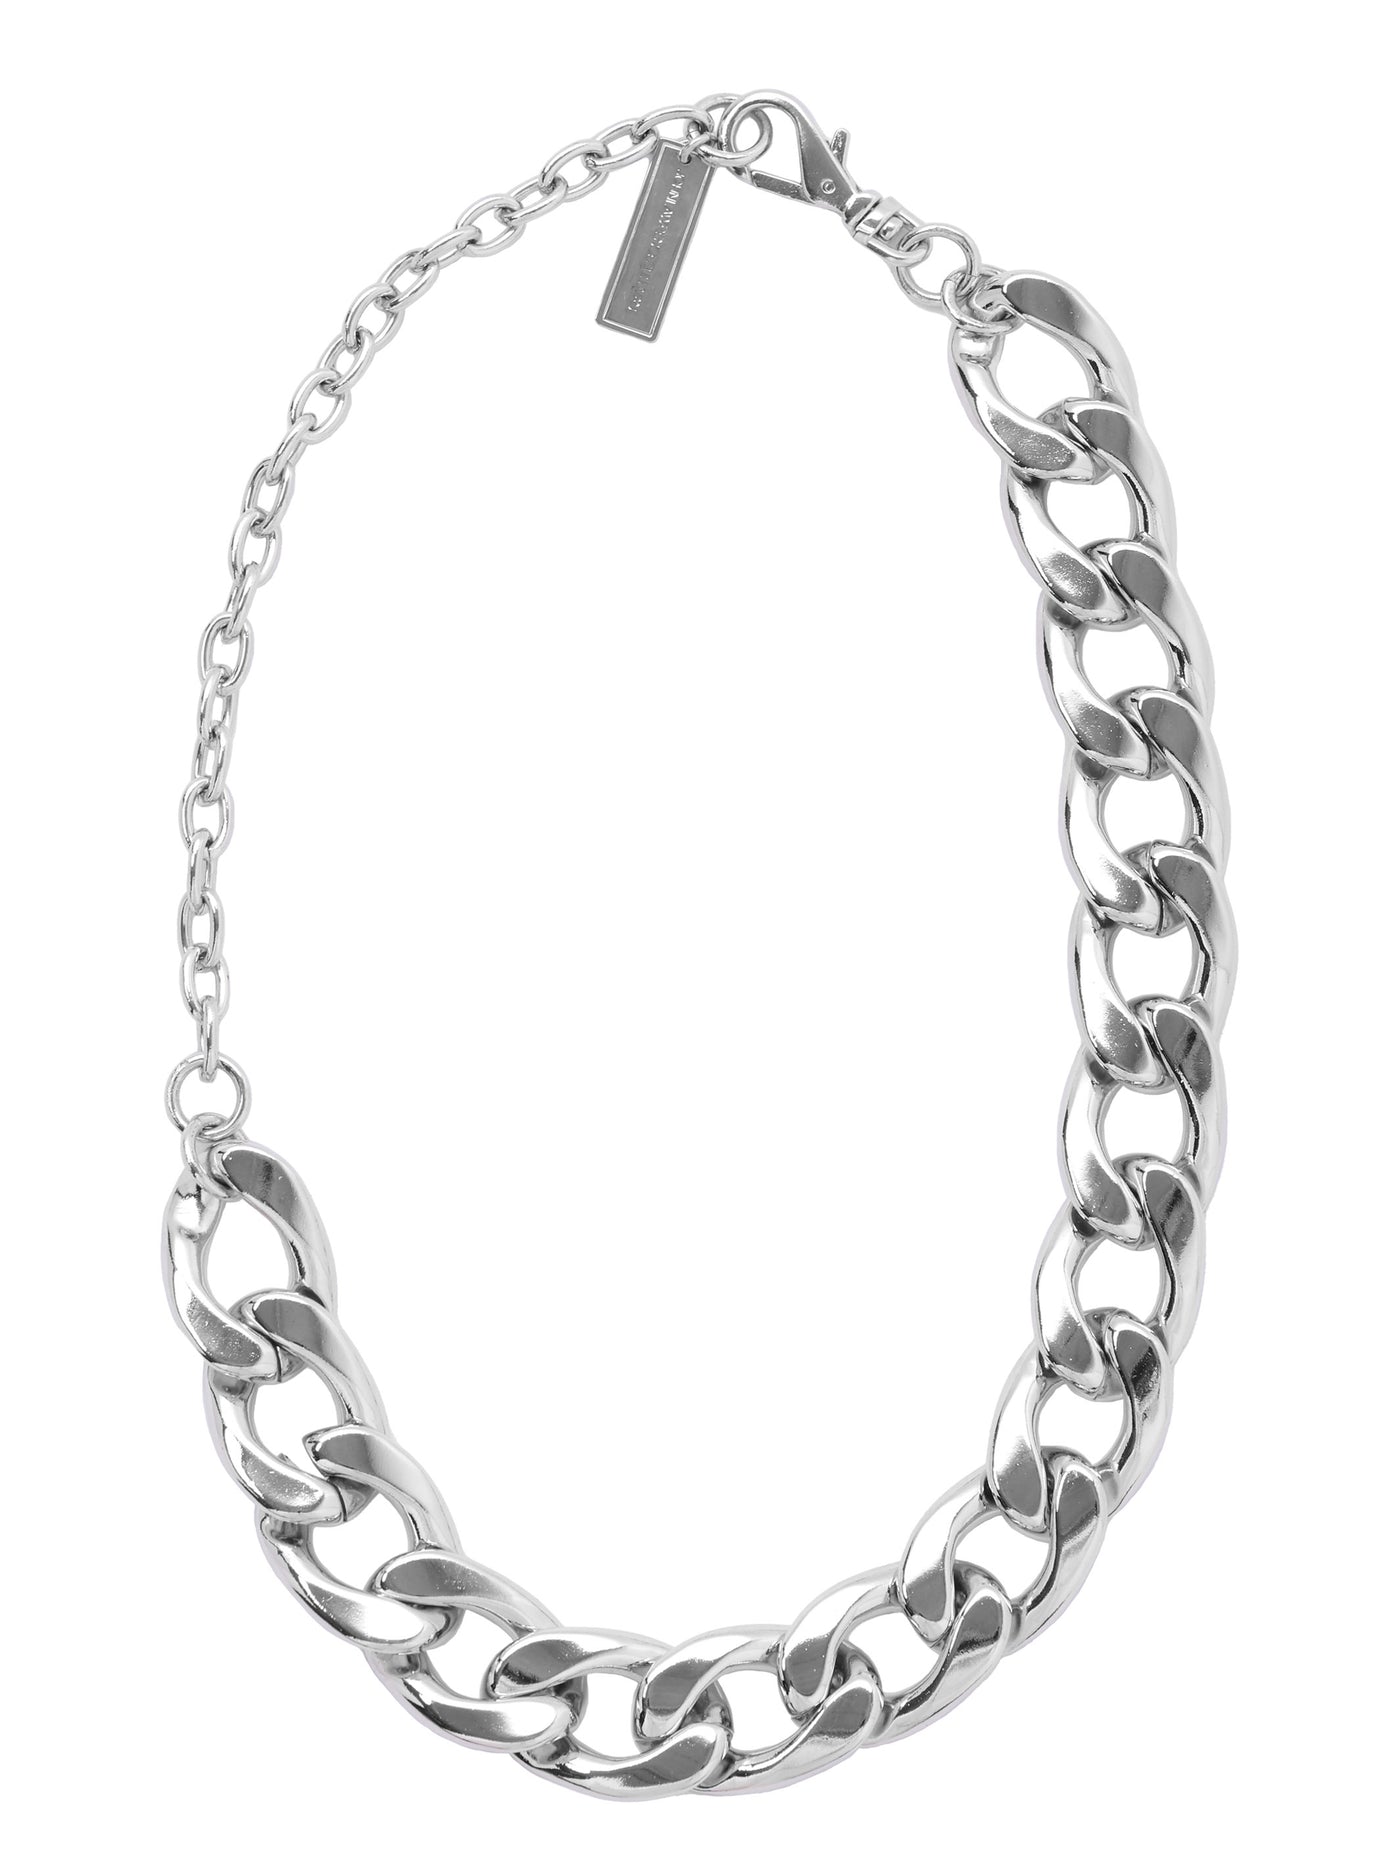 Mix chain necklace